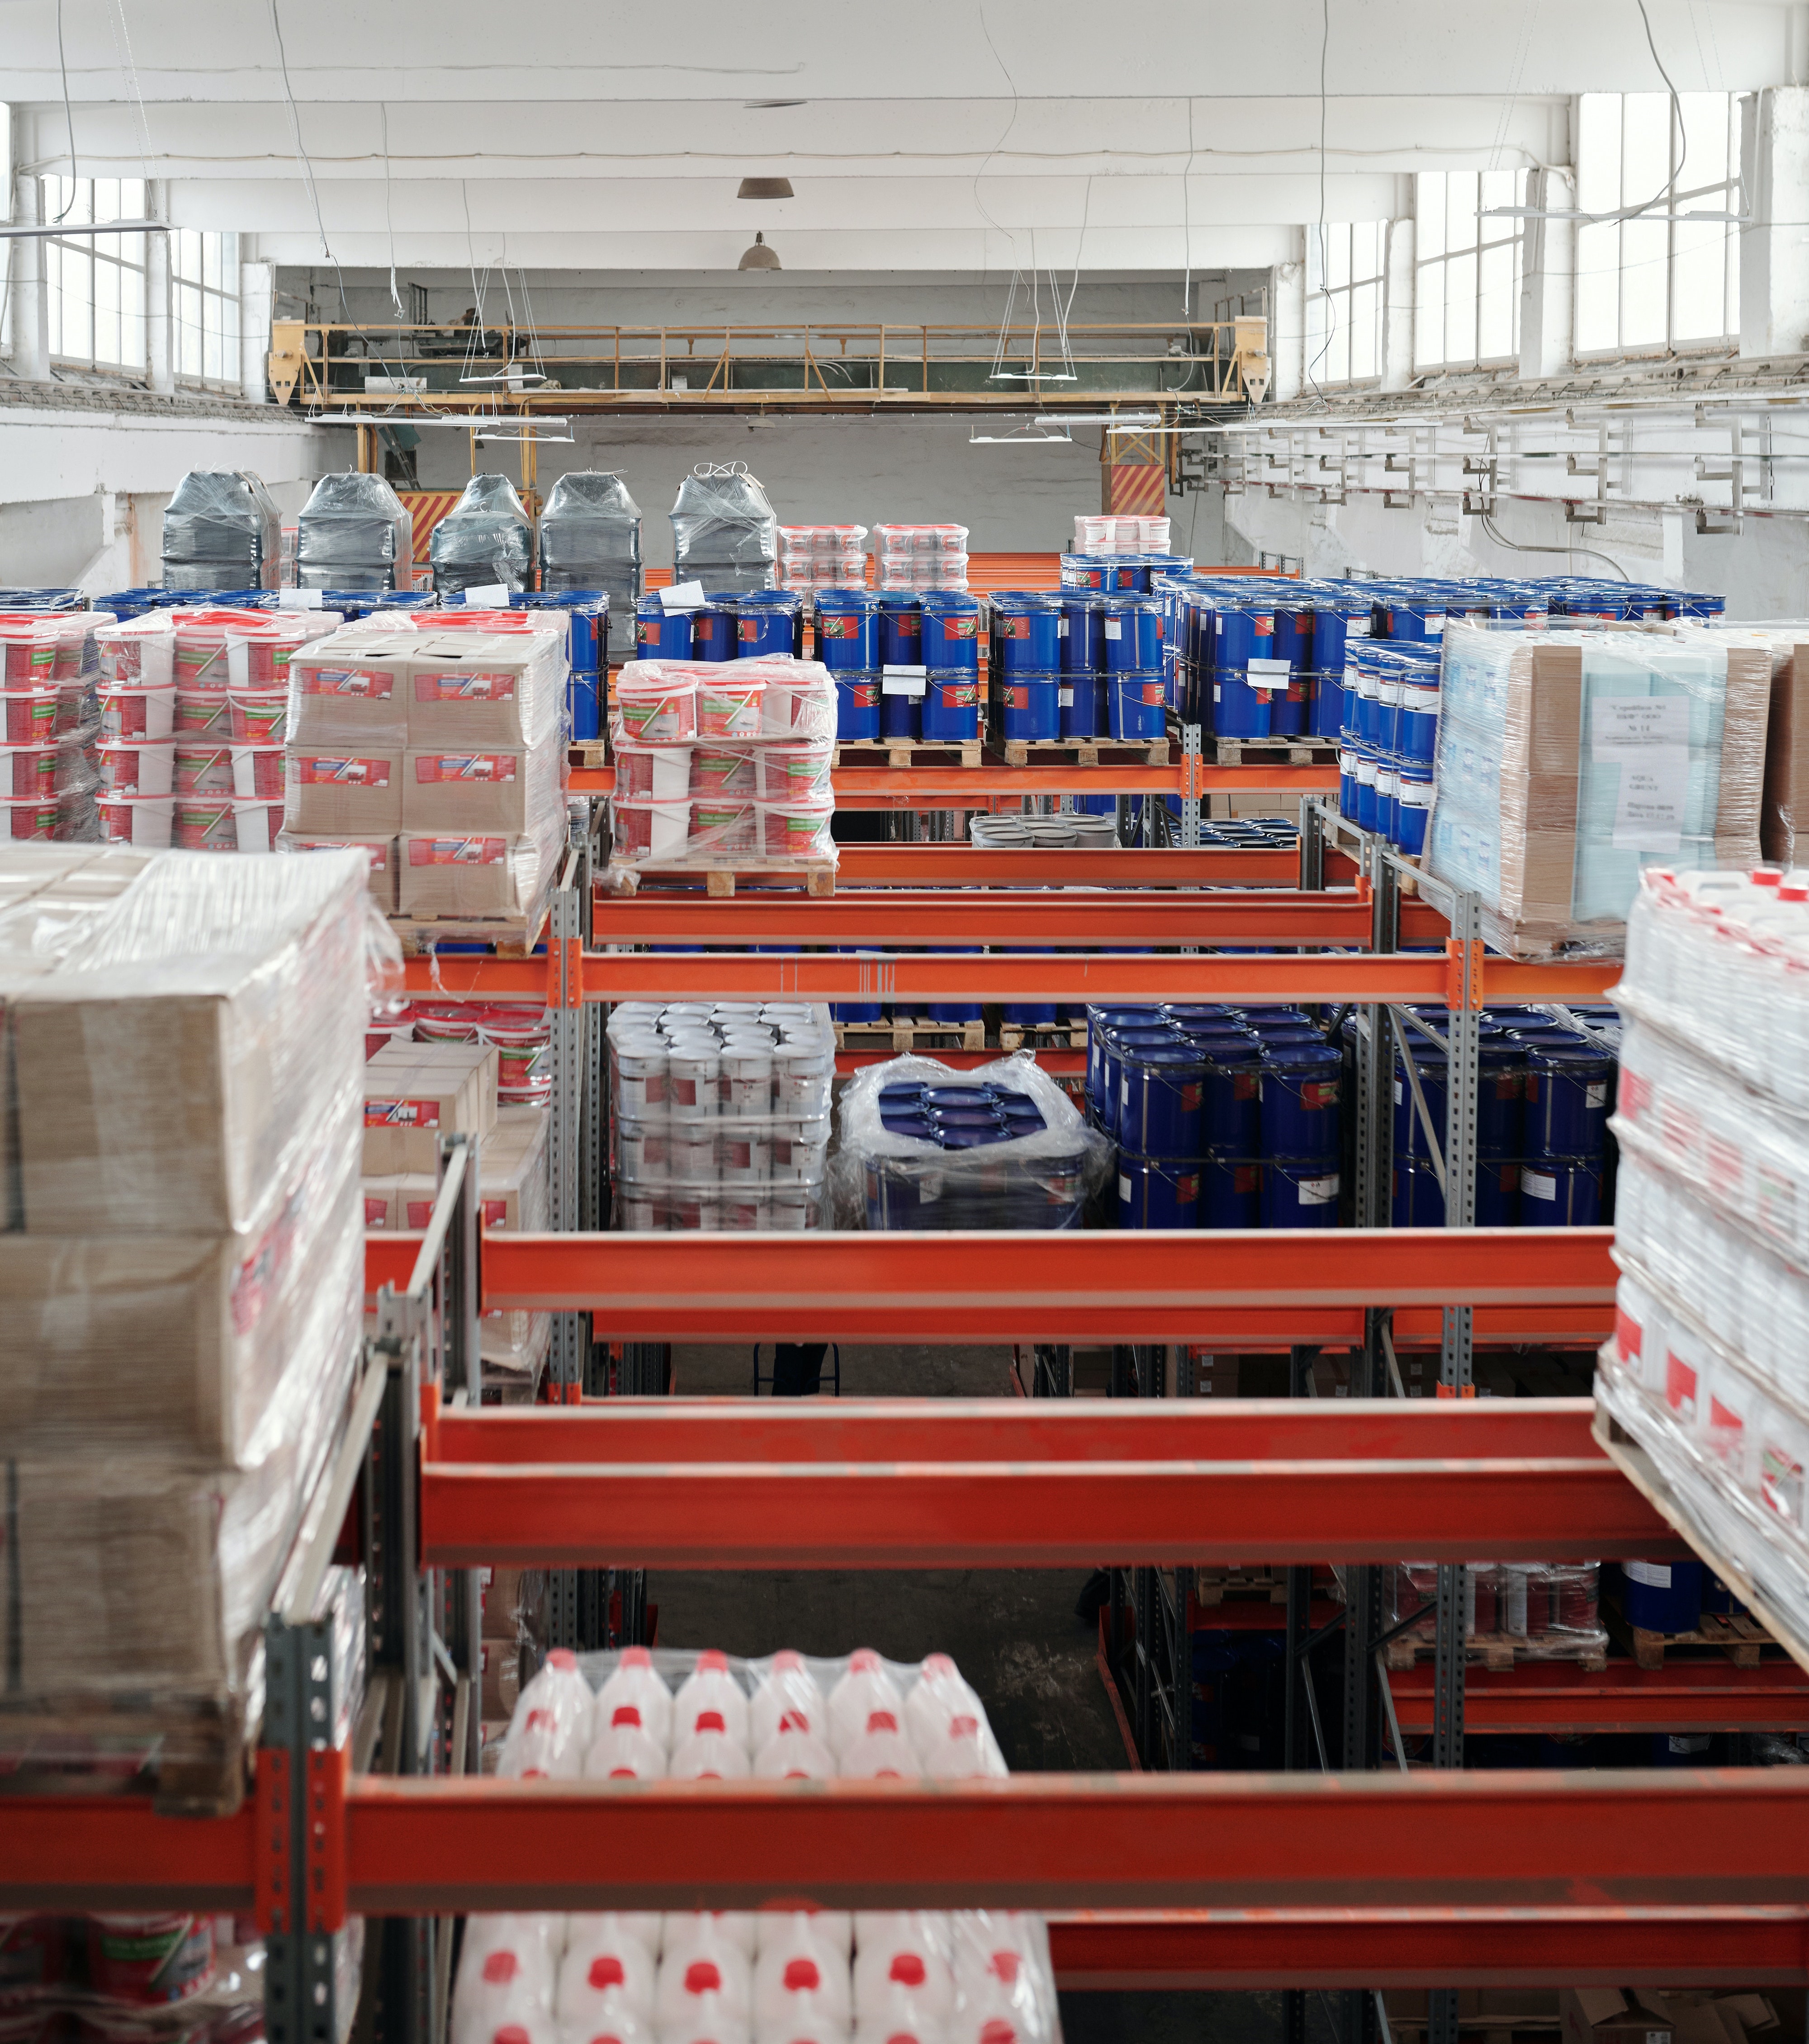 Warehouse of wrapped up pallets